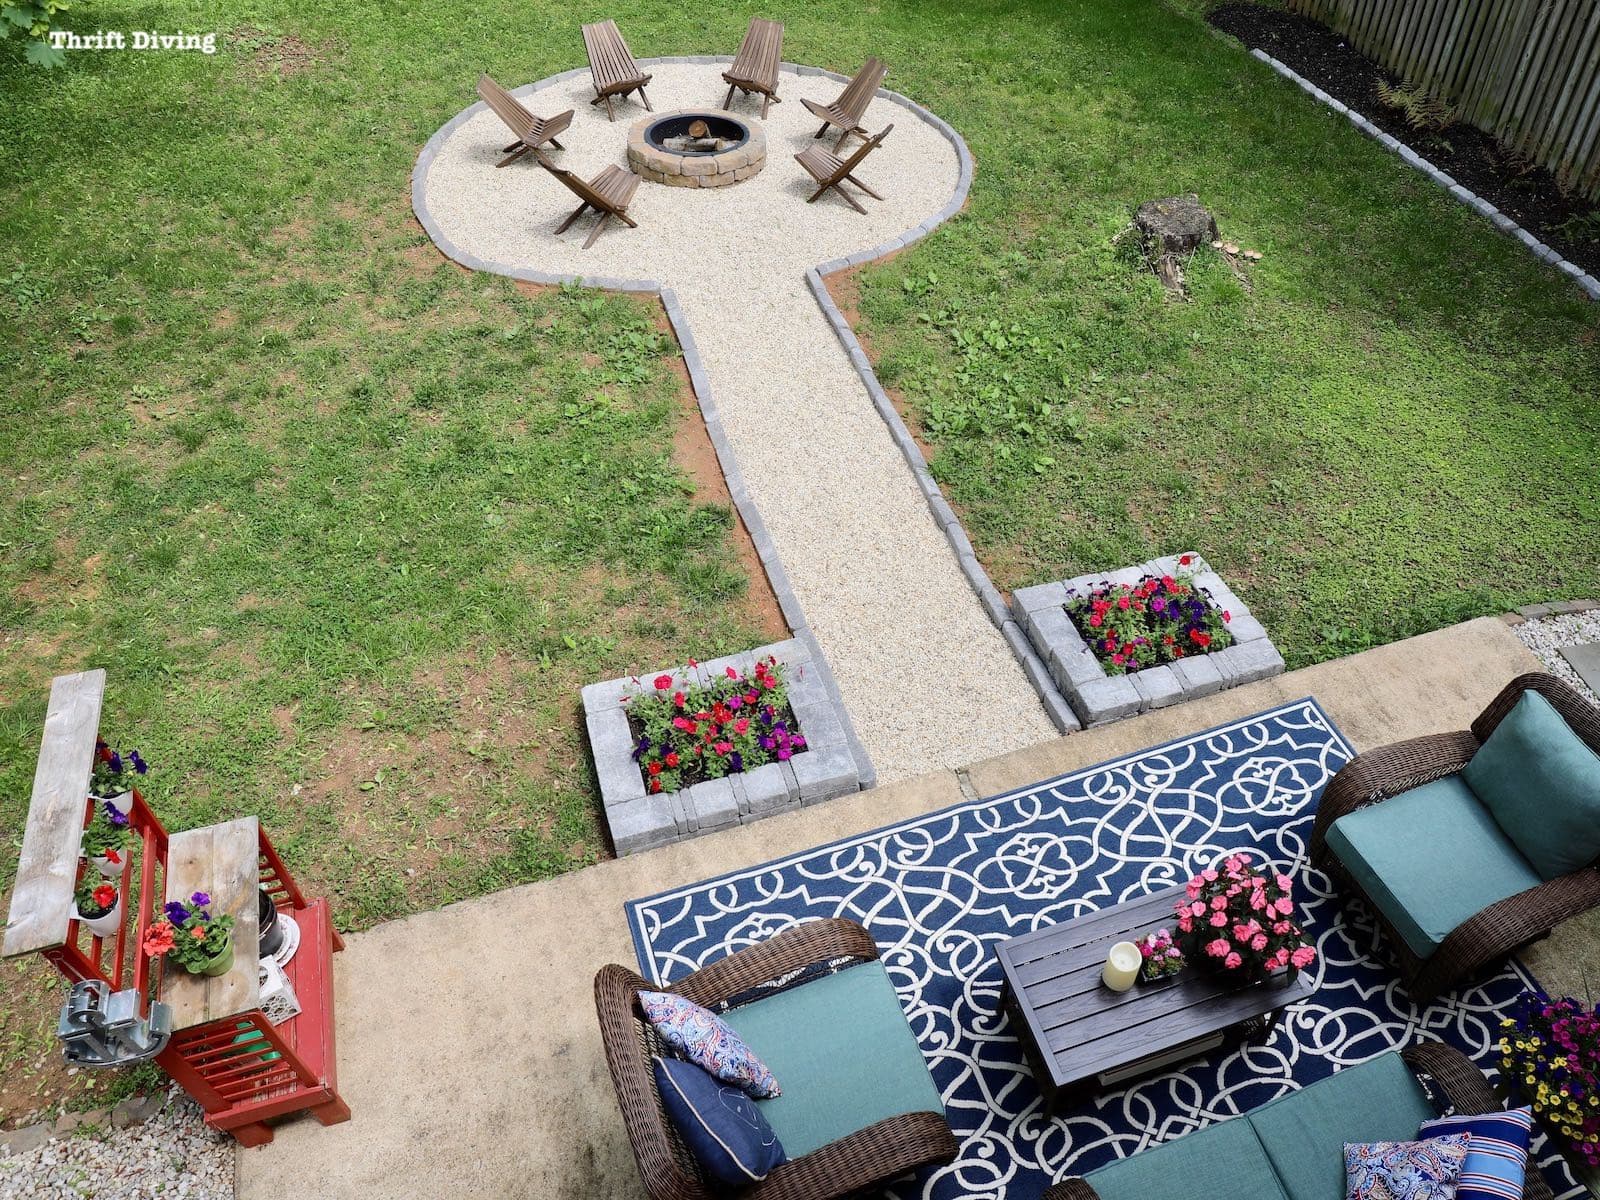 How to Build a DIY Fire Pit With Gravel, Stones, and Walkway